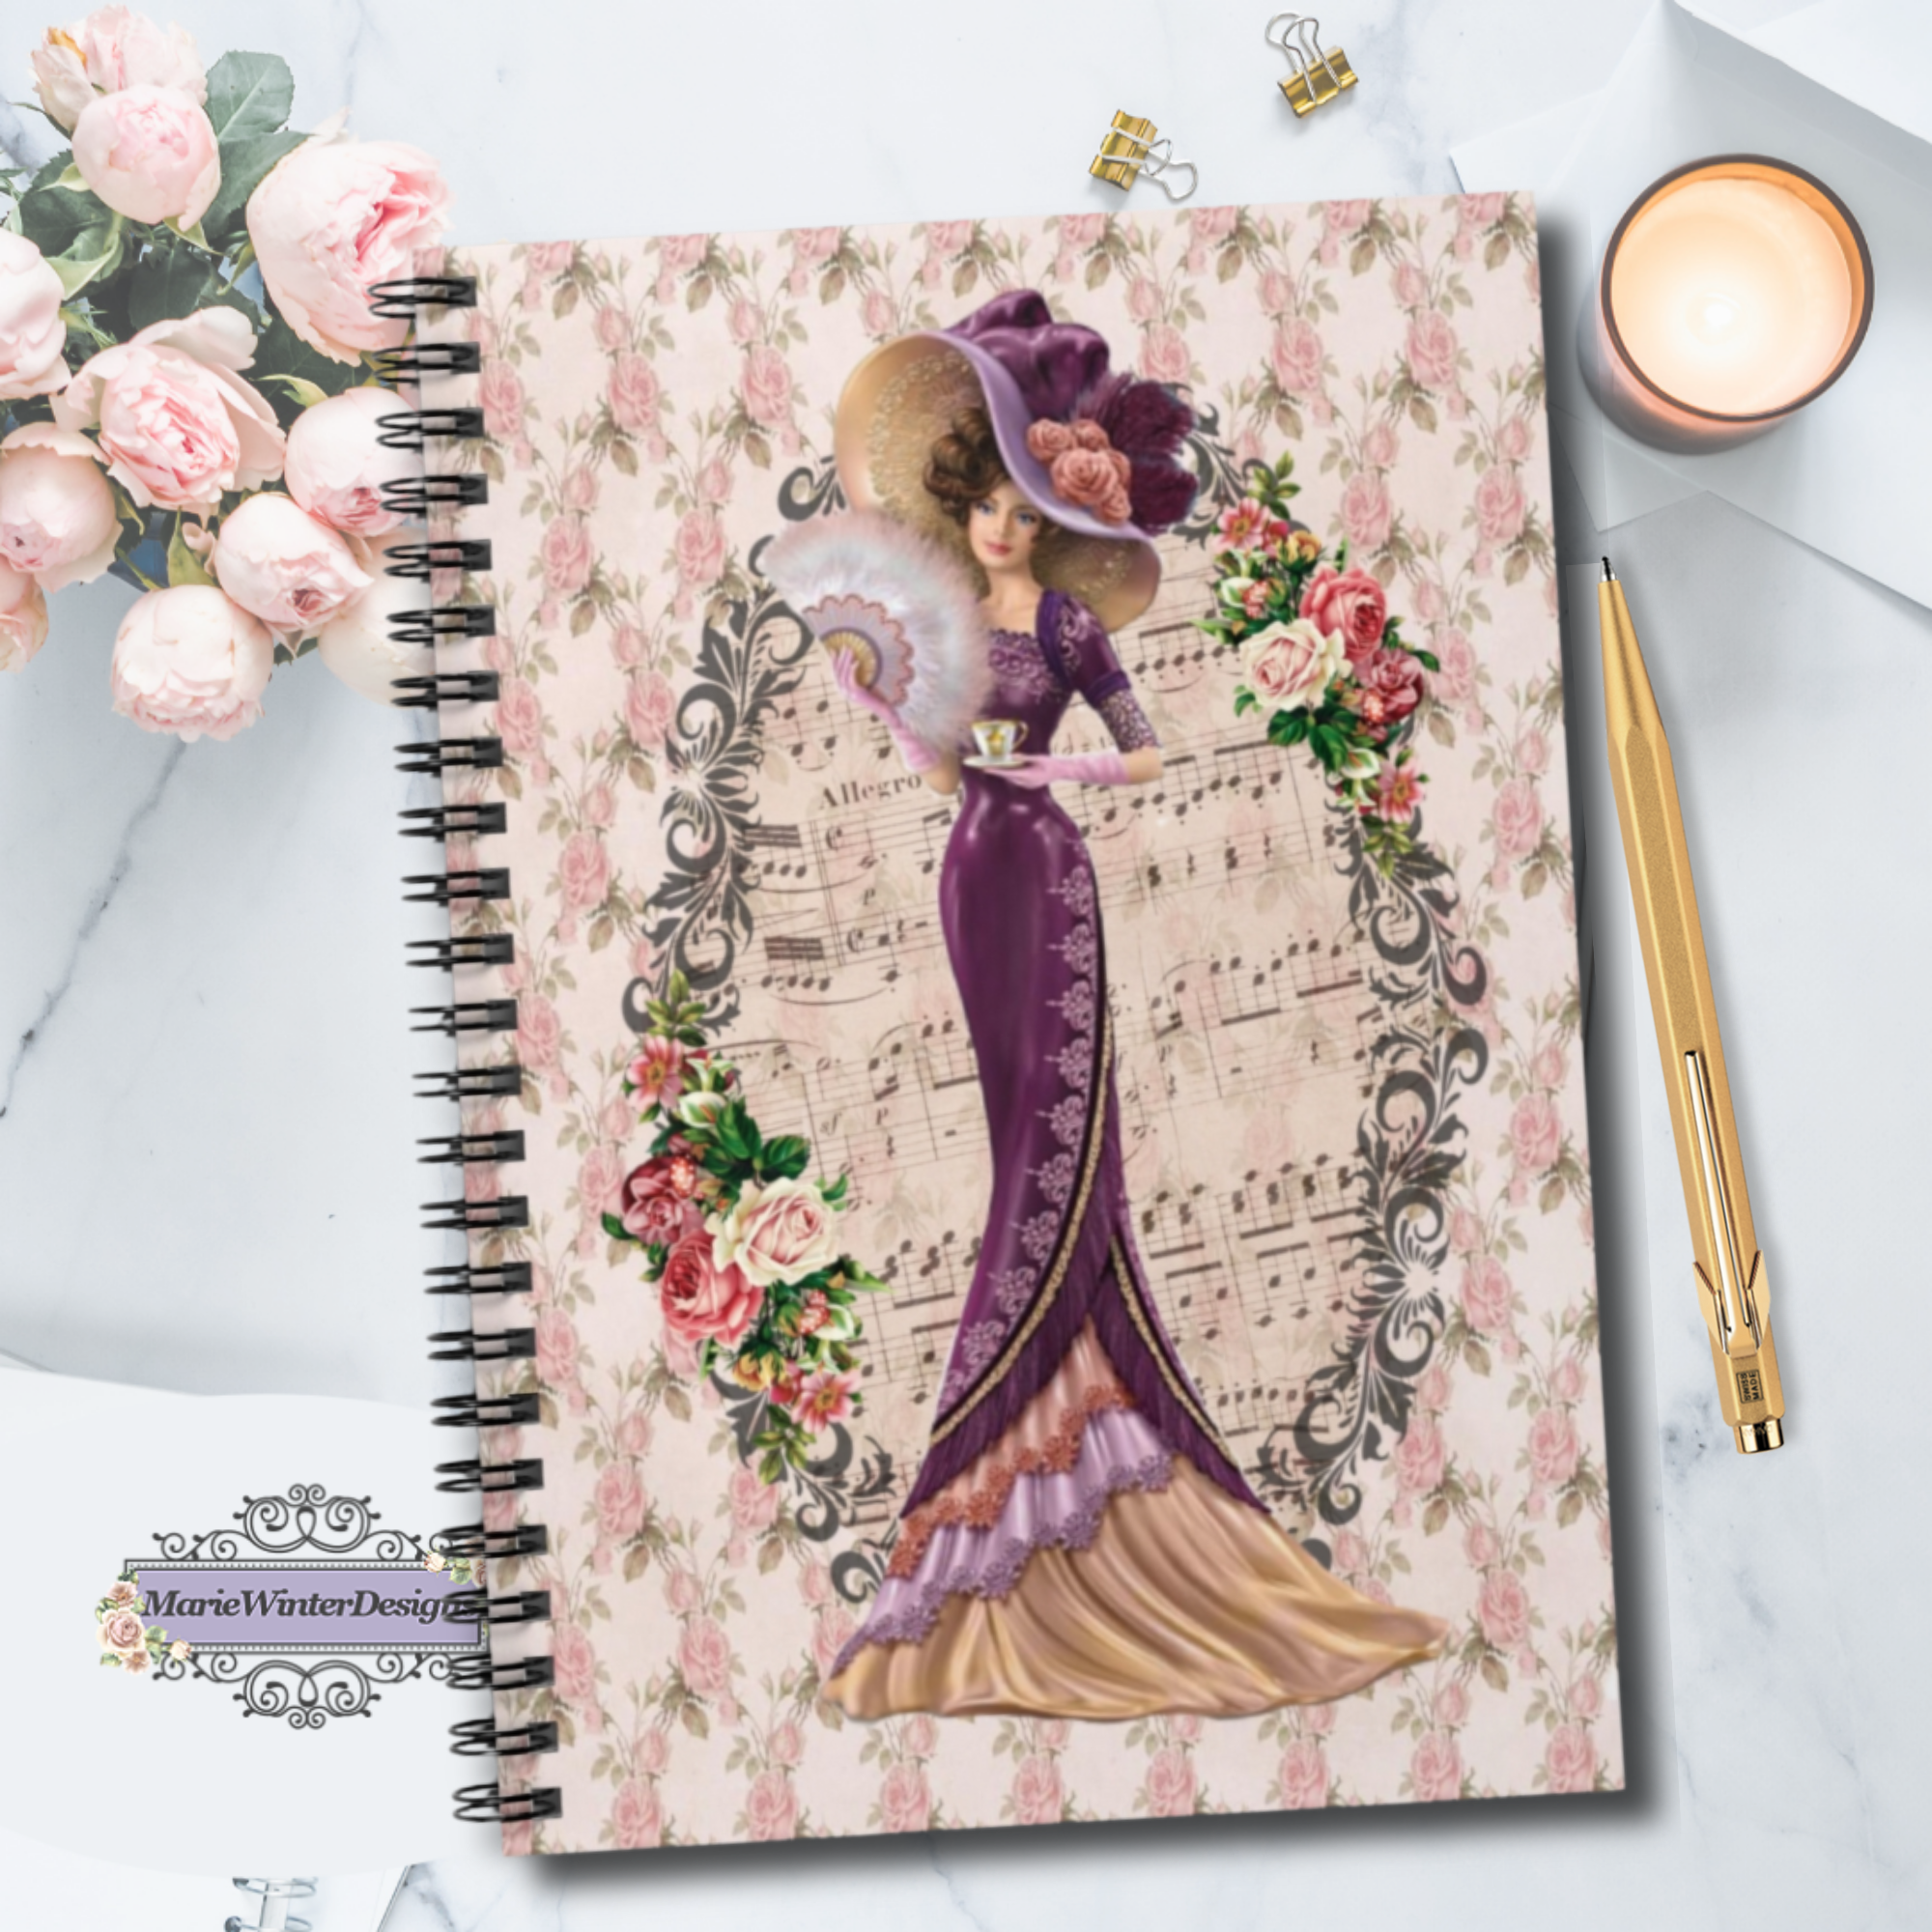 Spiral Bound Notebook Journal Lined Pages with Early 1900s Vintage Hello Dolly Lady in a Burgandy Dress and Large Hat on a Floral Background with pen, candle pink roses behind